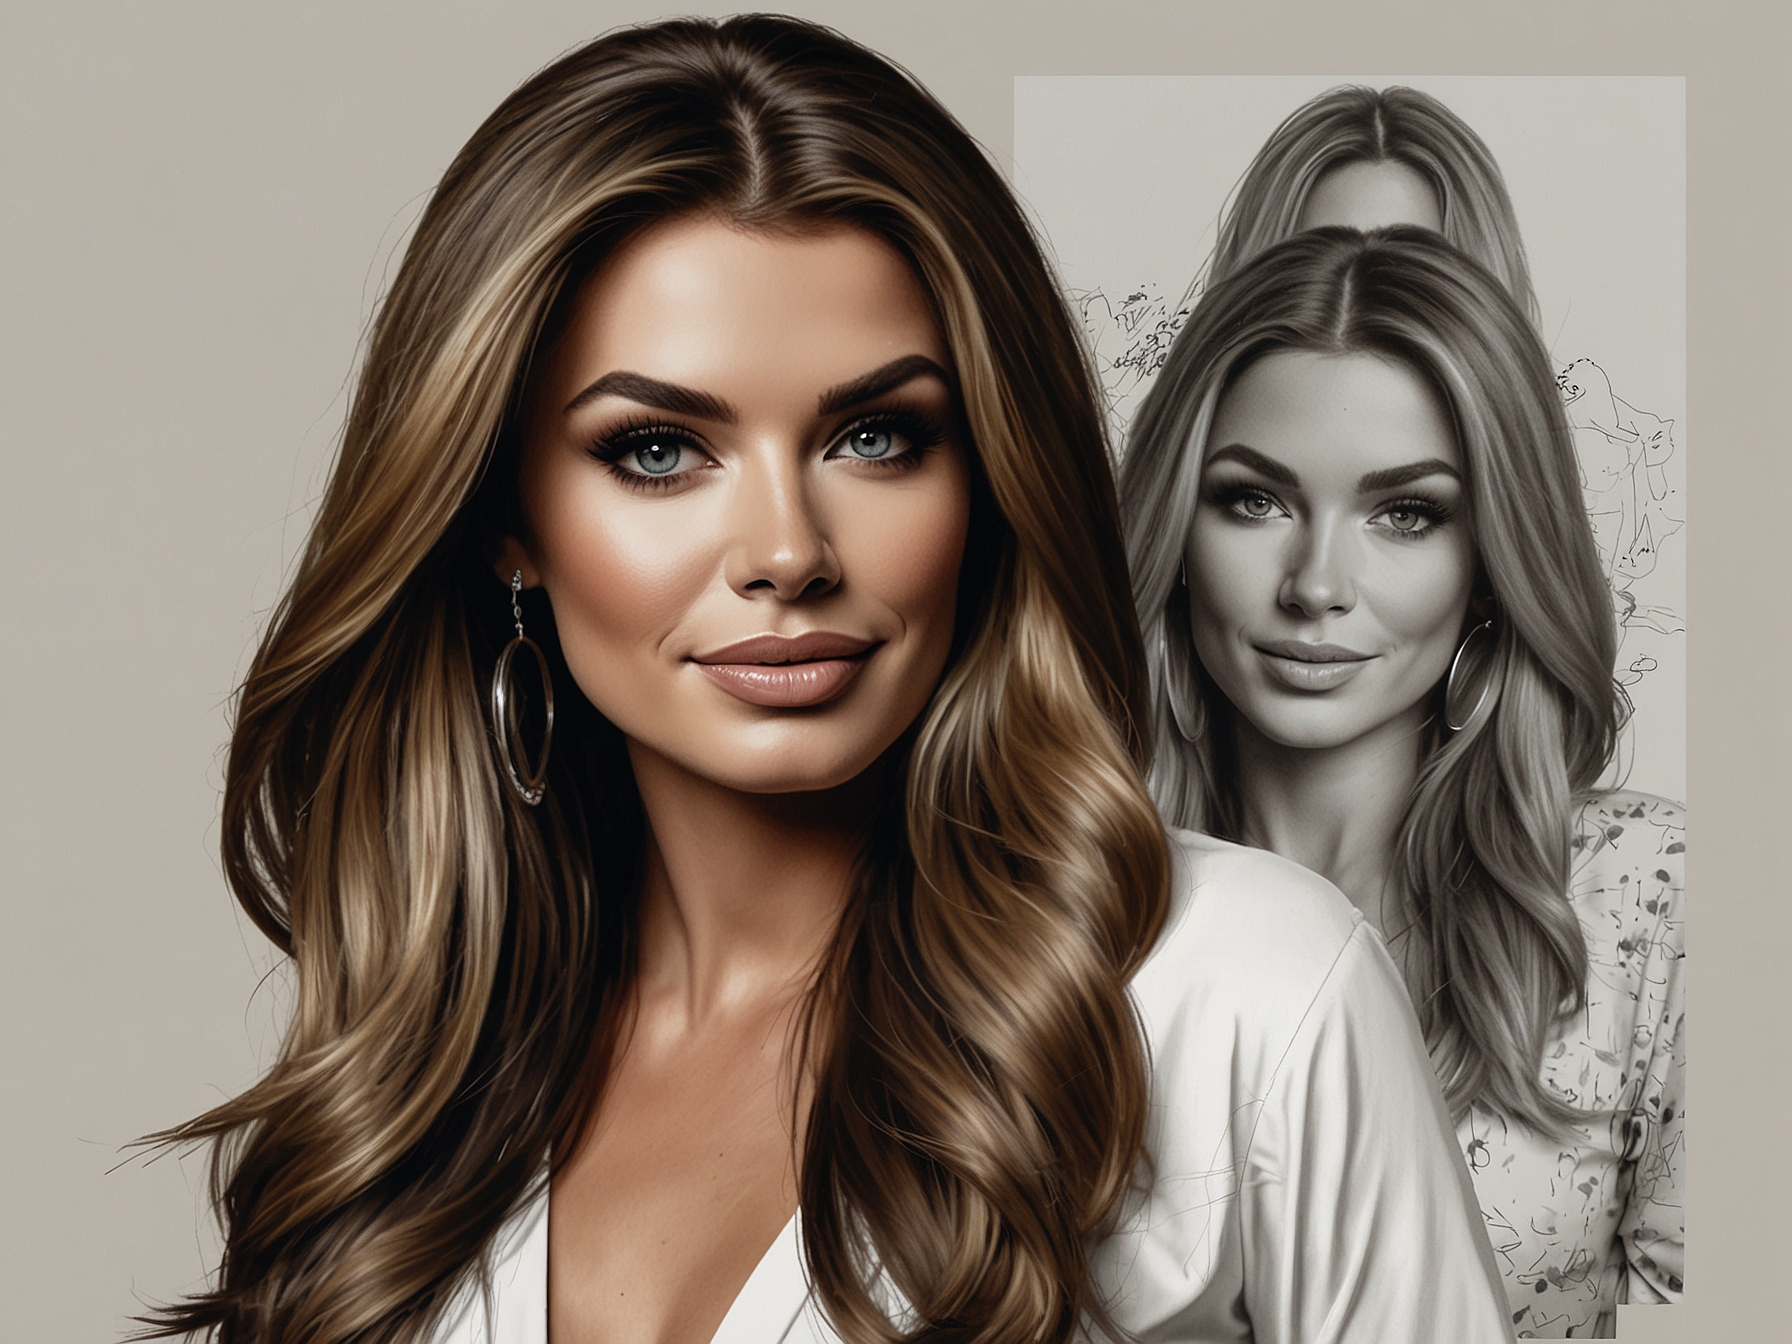 Hannah Elizabeth posing confidently, highlighting her entrepreneurial spirit and beauty line products, symbolizing her dynamic role in 'Real Housewives of Cheshire.'